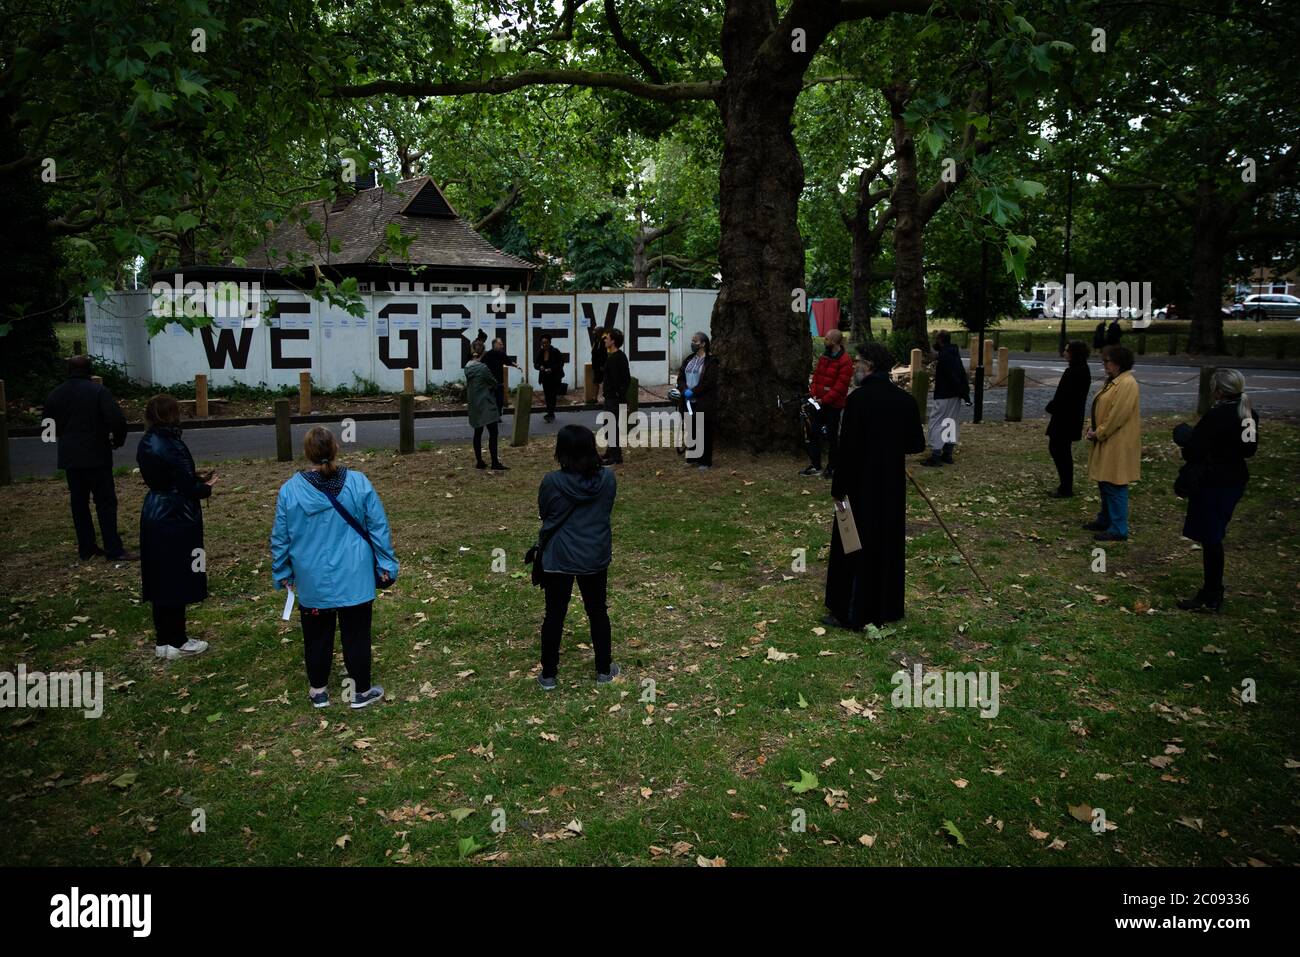 Members of the local community gather at a memorial Wall with the words 'We Grieve' and the names of local people who have died from COVID-19 and other non-coronavirus related causes like terminal illness during the Coronavirus outbreak, written on hoarding around Liberty Hall on Clapton Common, London. Stock Photo